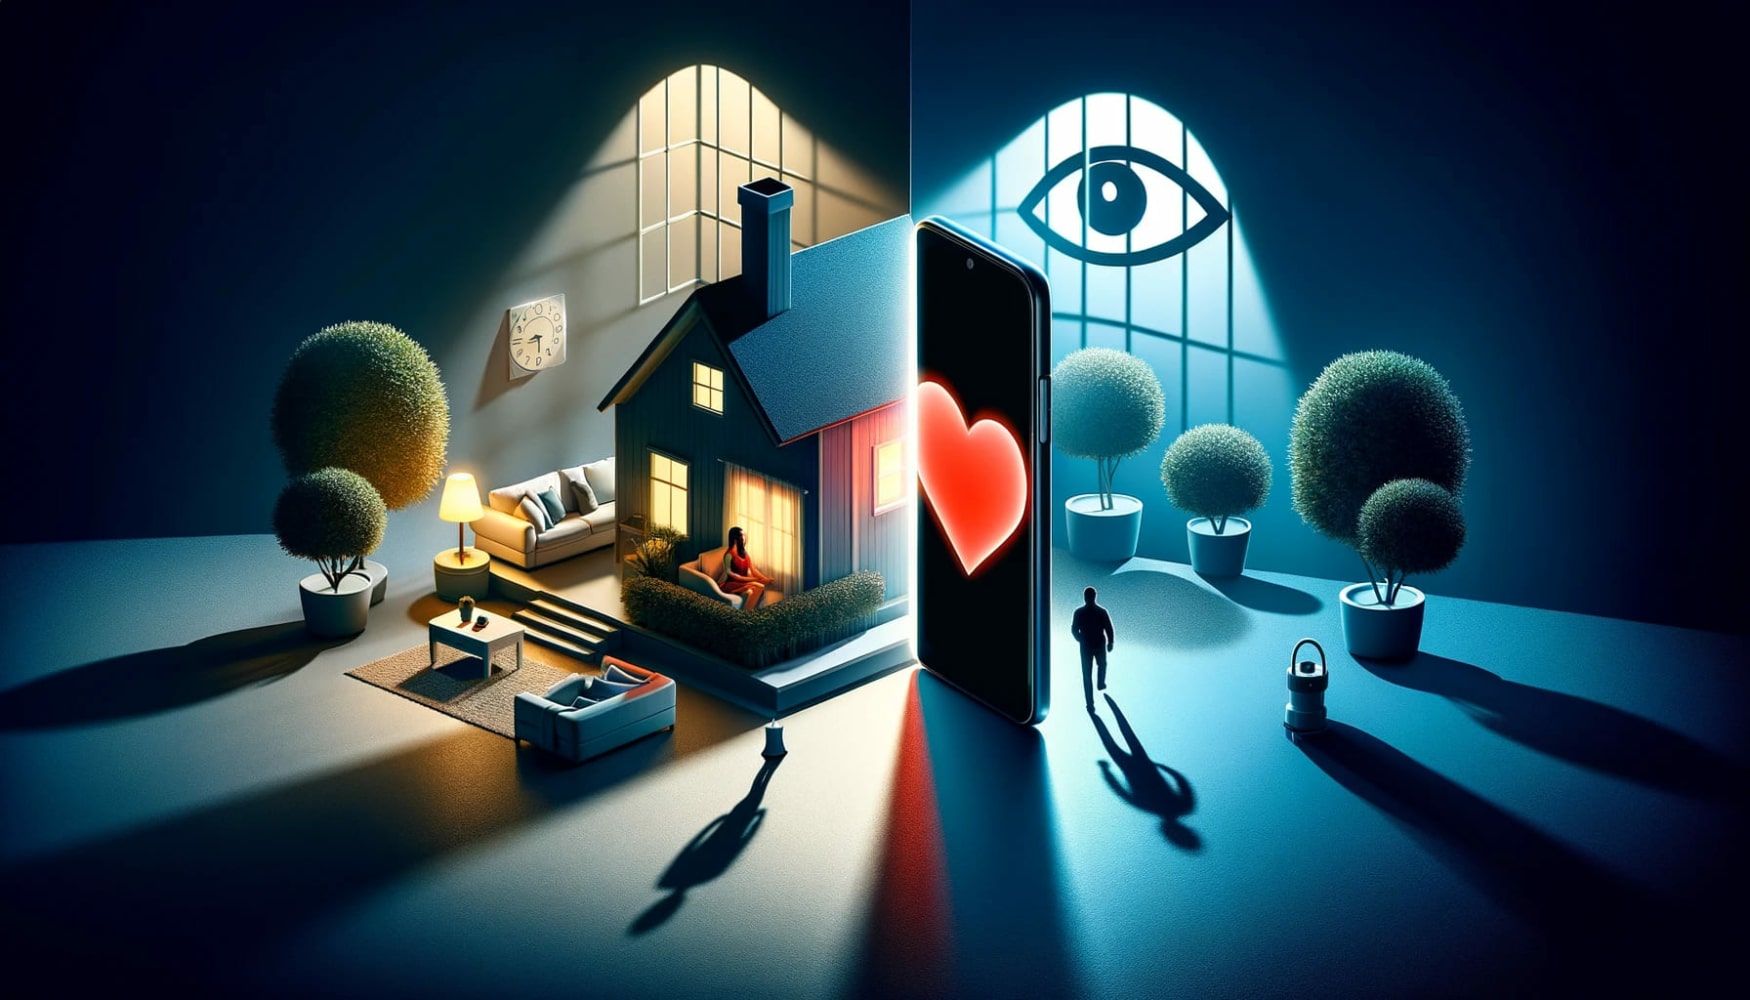 A conceptual artwork depicting the dual nature of phone tracking applications in marriage, with one side showing a smartphone displaying a heart symbol in a bright, secure setting, and the other side a smartphone with an eye icon in a shadowy ambiance, symbolizing the balance between care and surveillance.